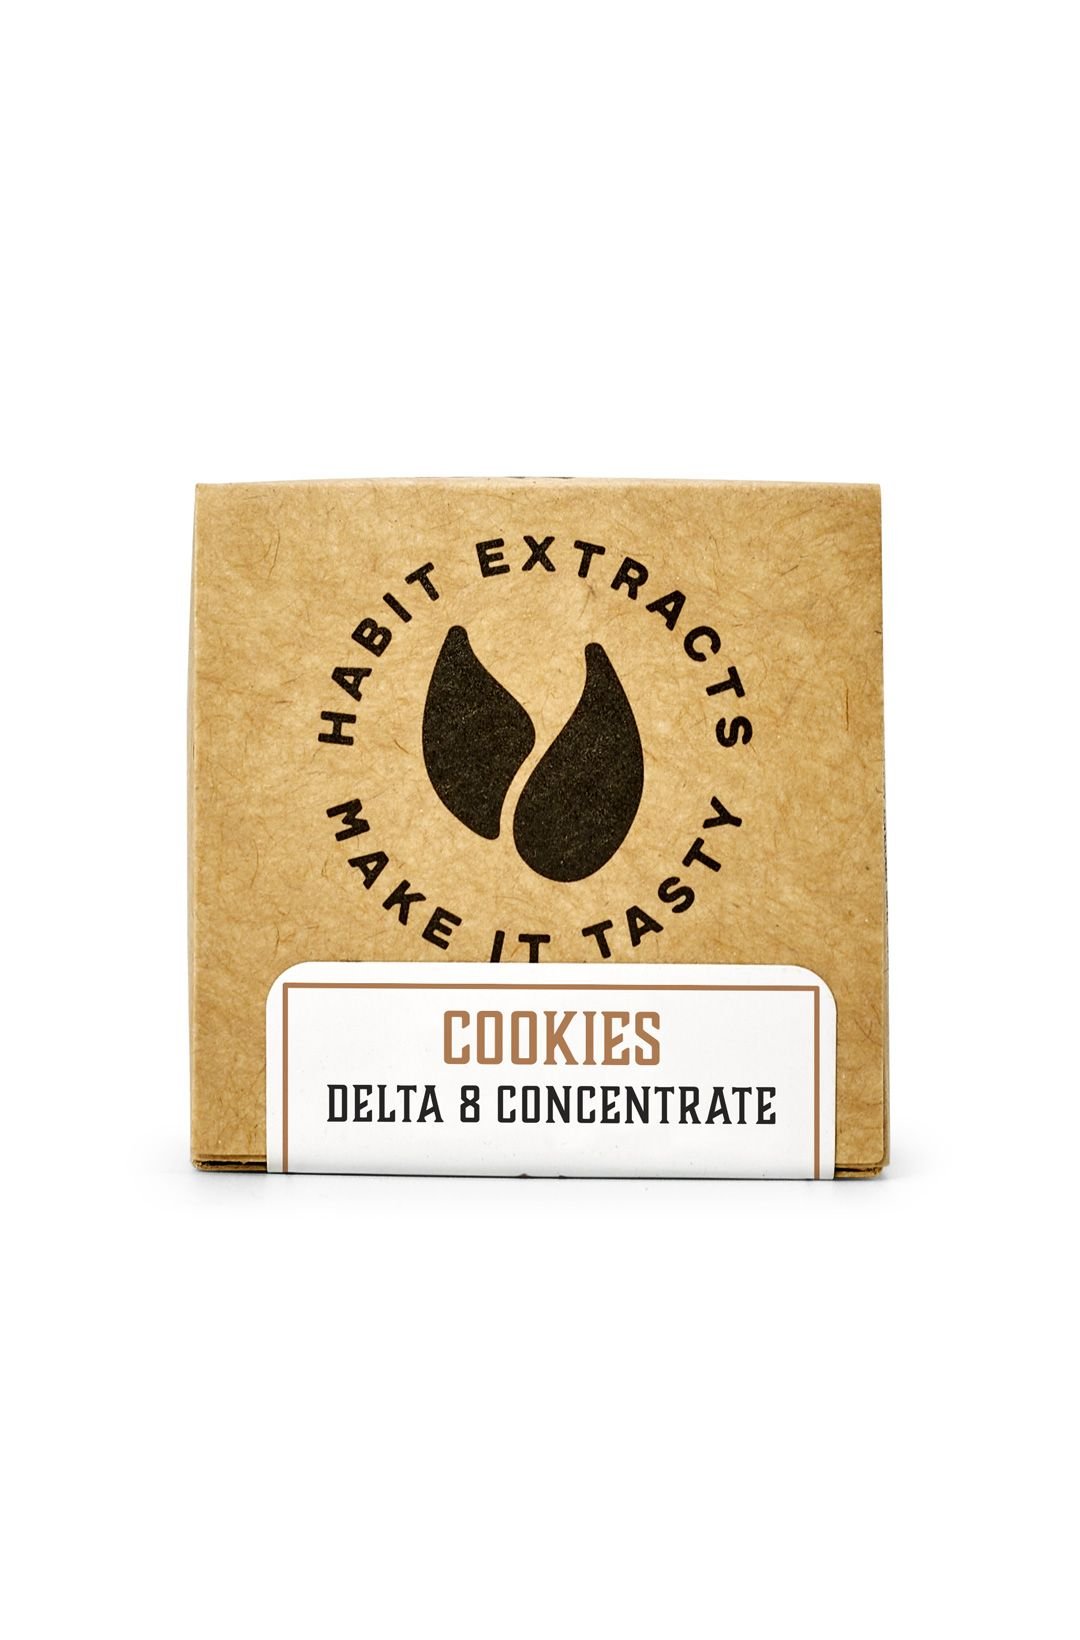 Delta 8 Concentrate 1g Cookies - Tree Spirit Wellness